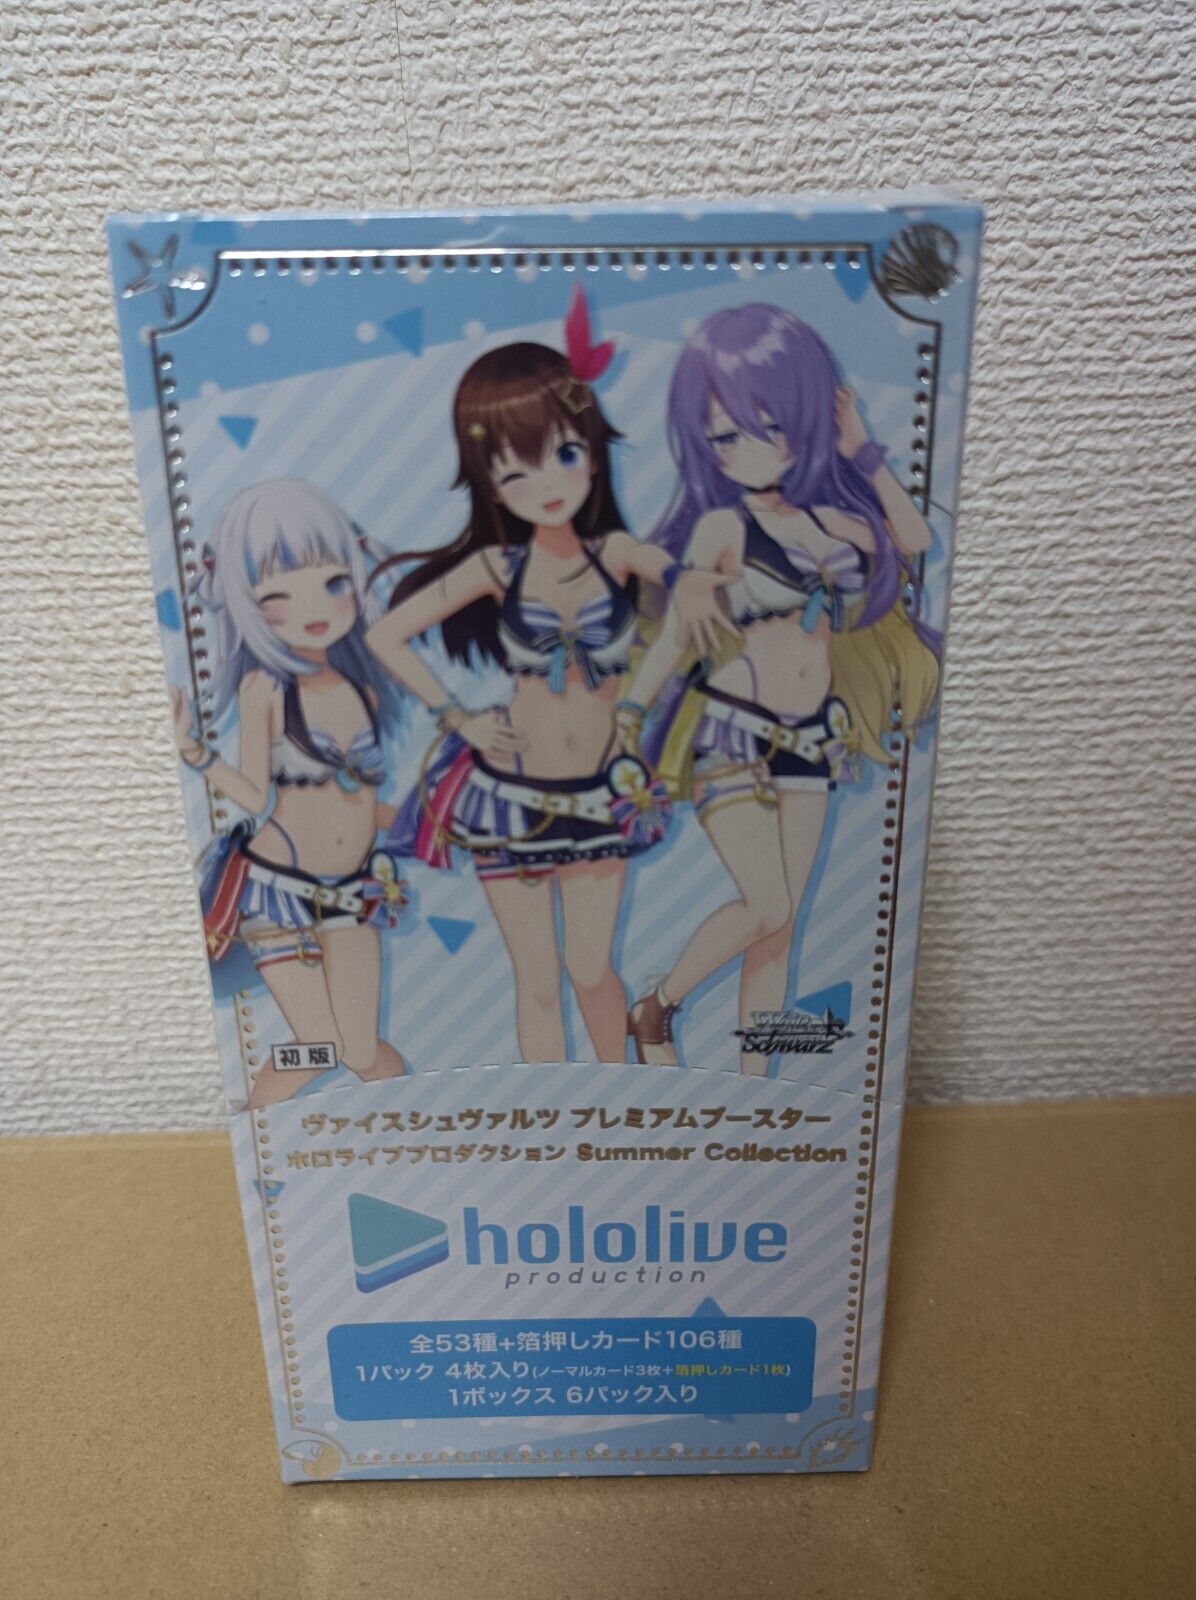 Weiss Schwarz Premium Booster hololive production summer collection box card TCG